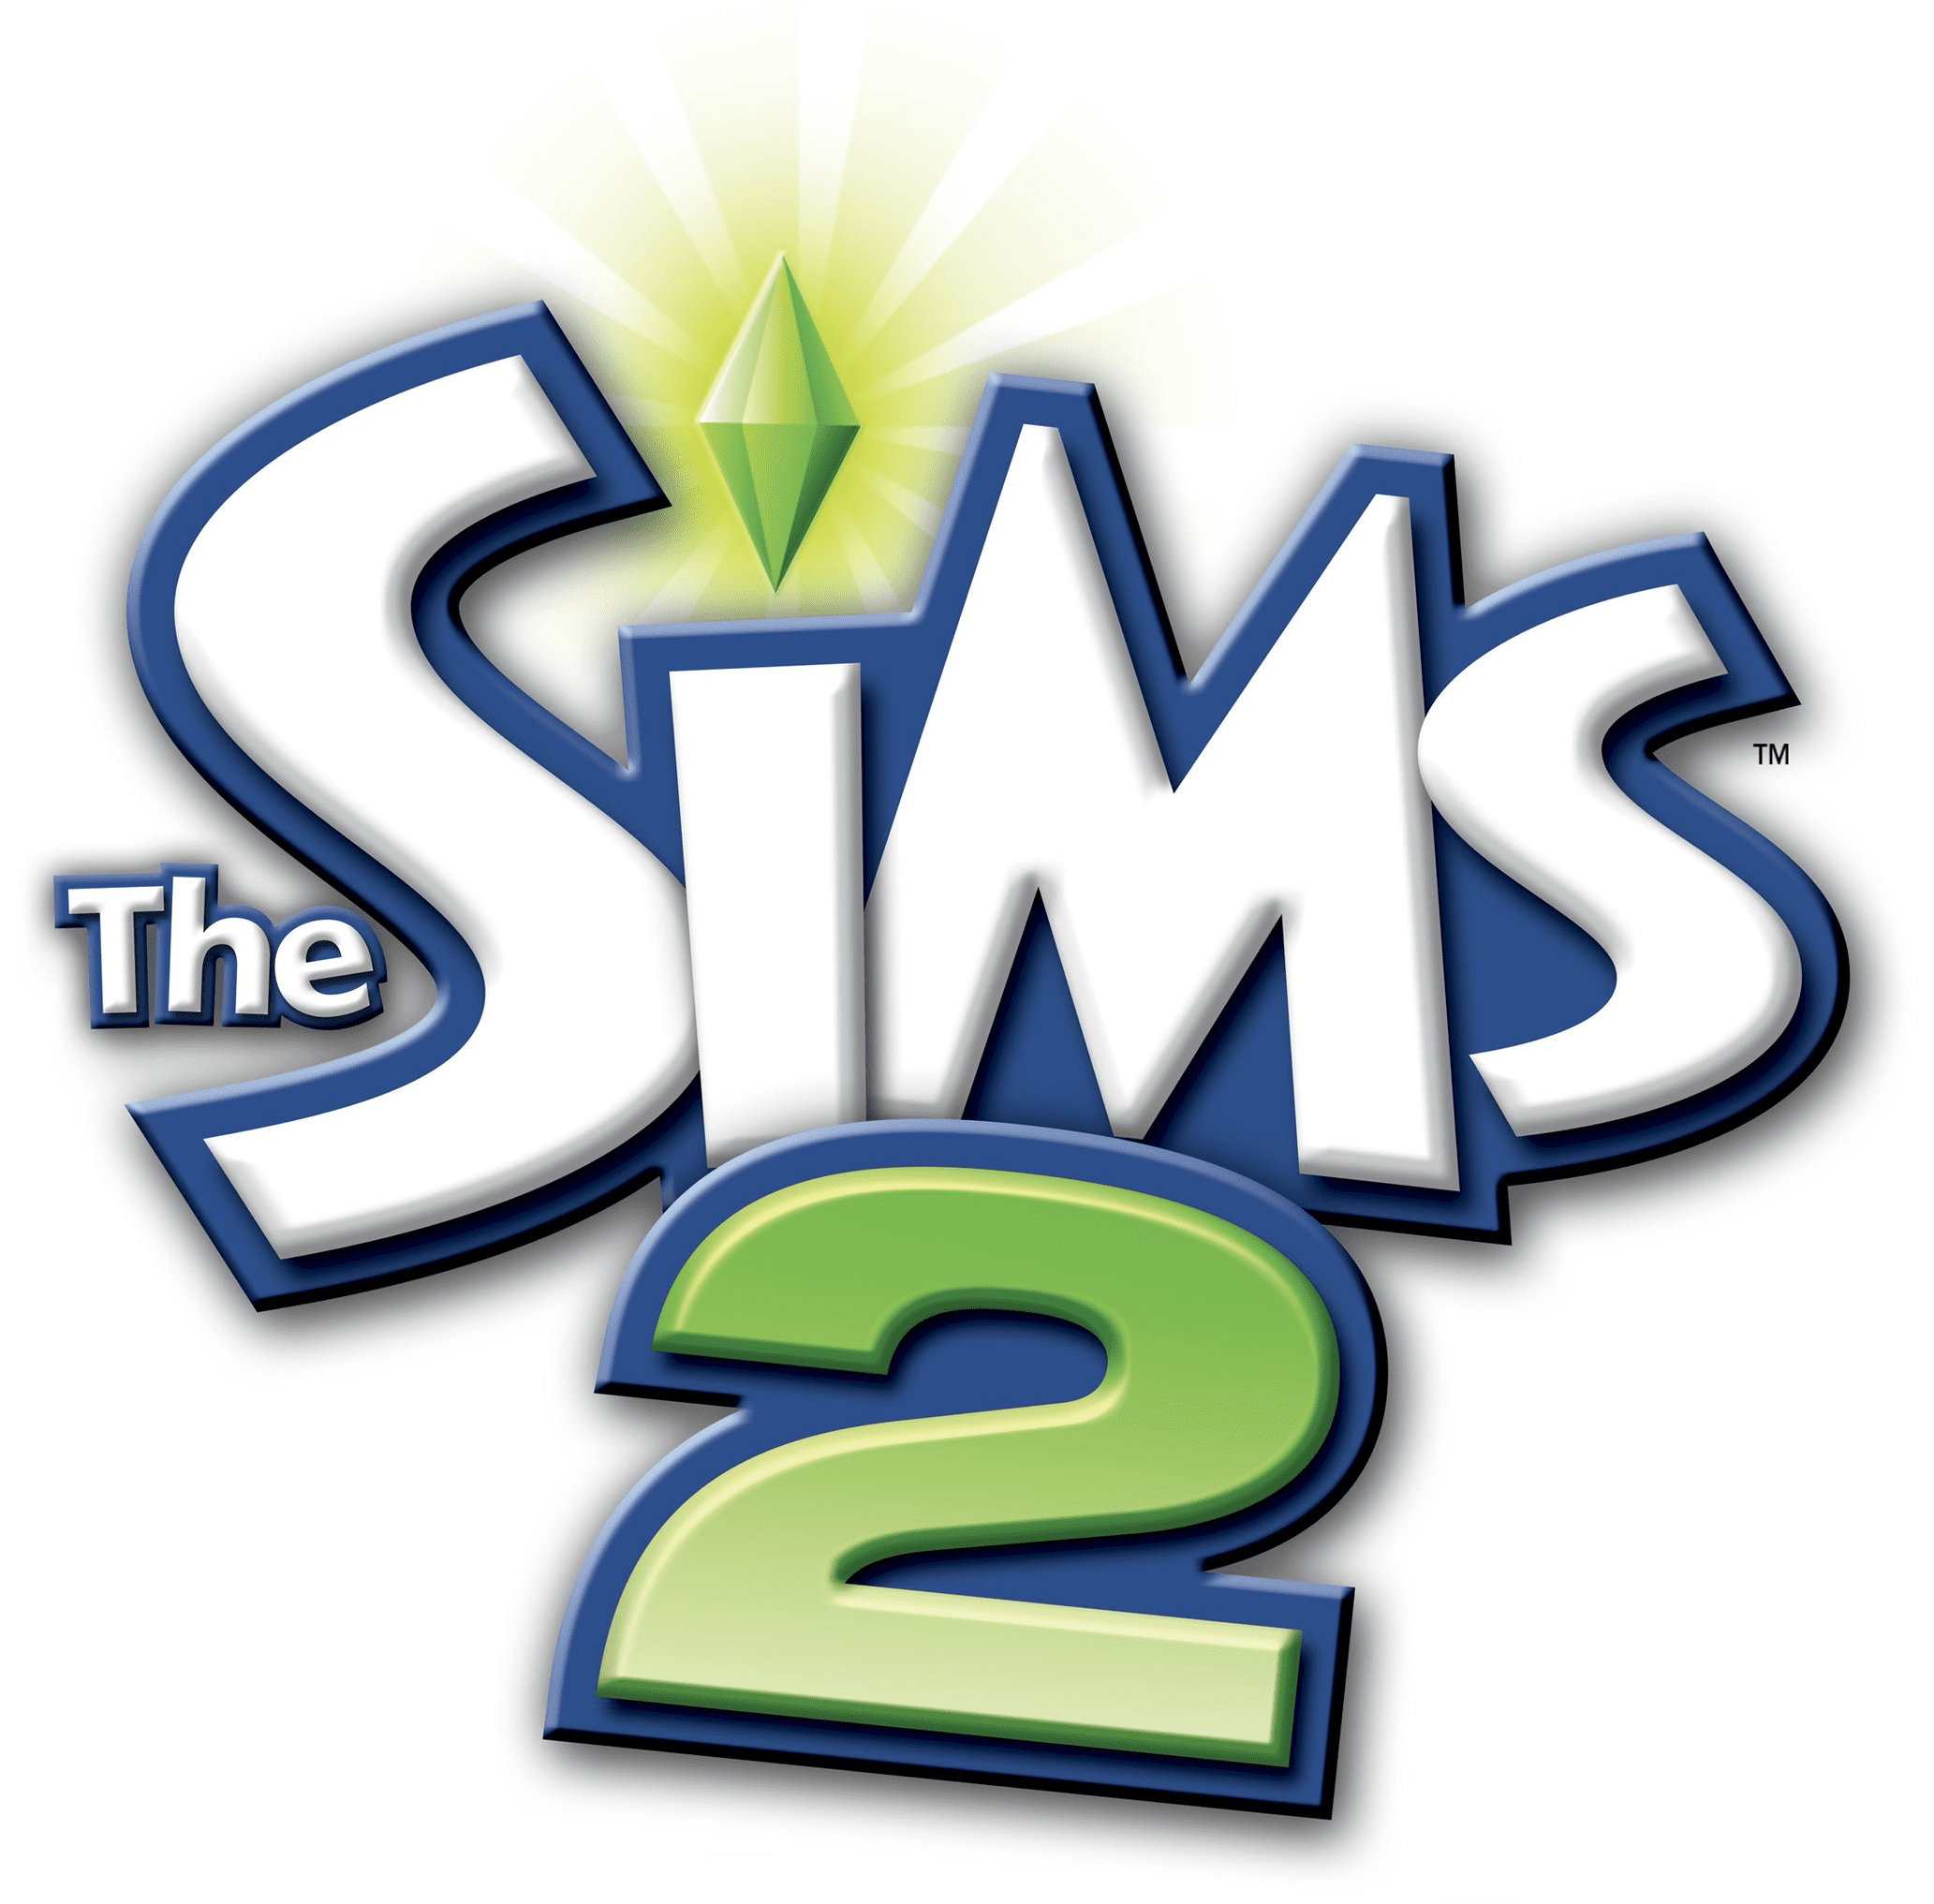 Download Sims 2 Censor Patch Cheat Sheet